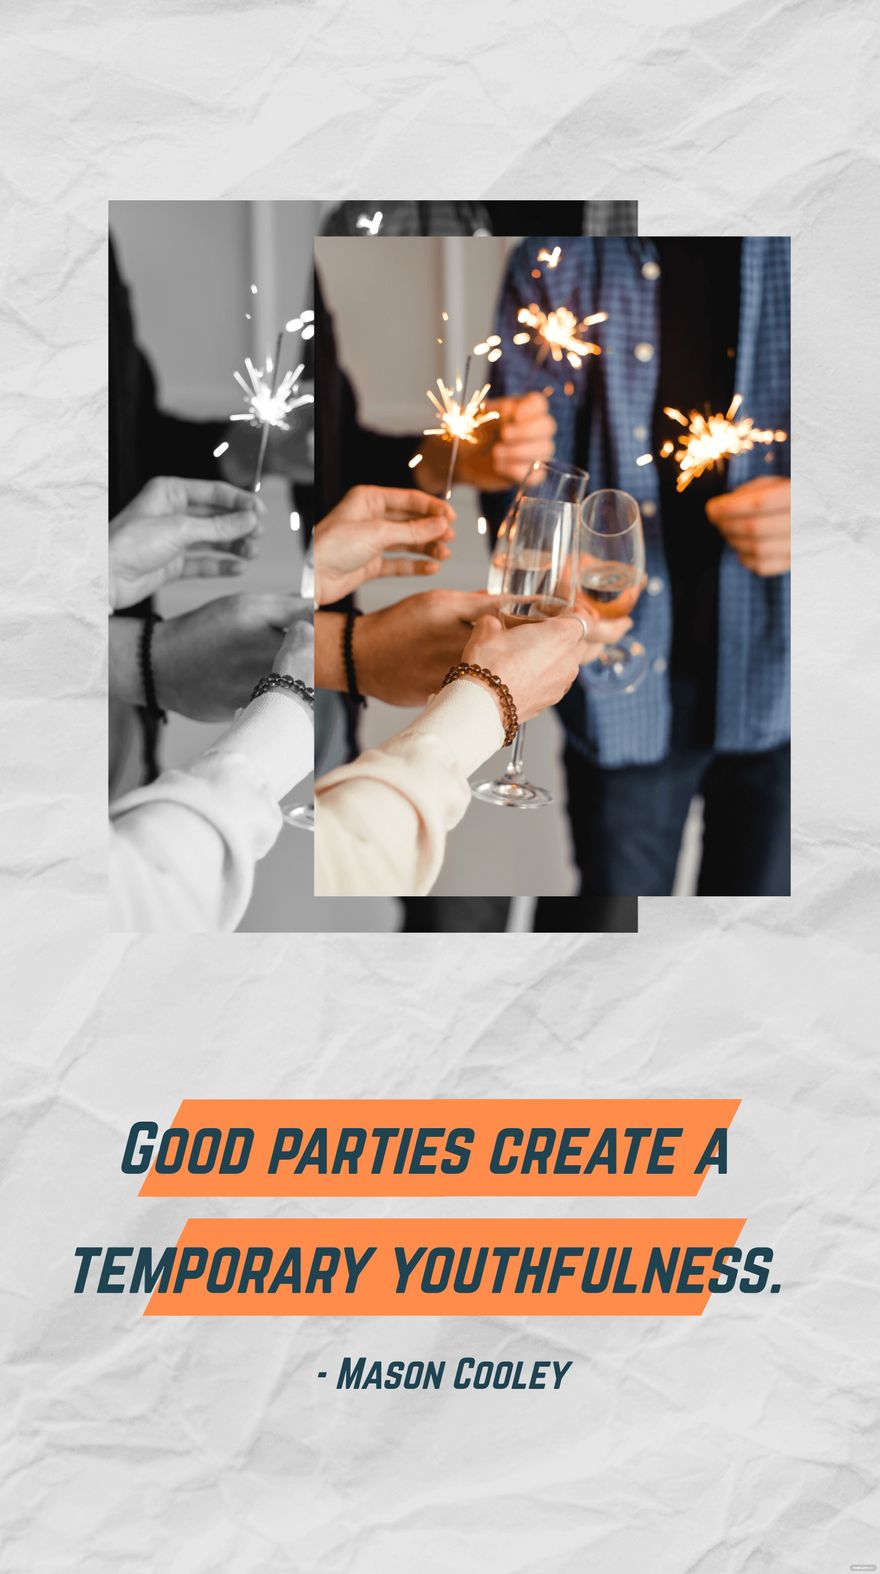 Free Good parties create a temporary youthfulness.